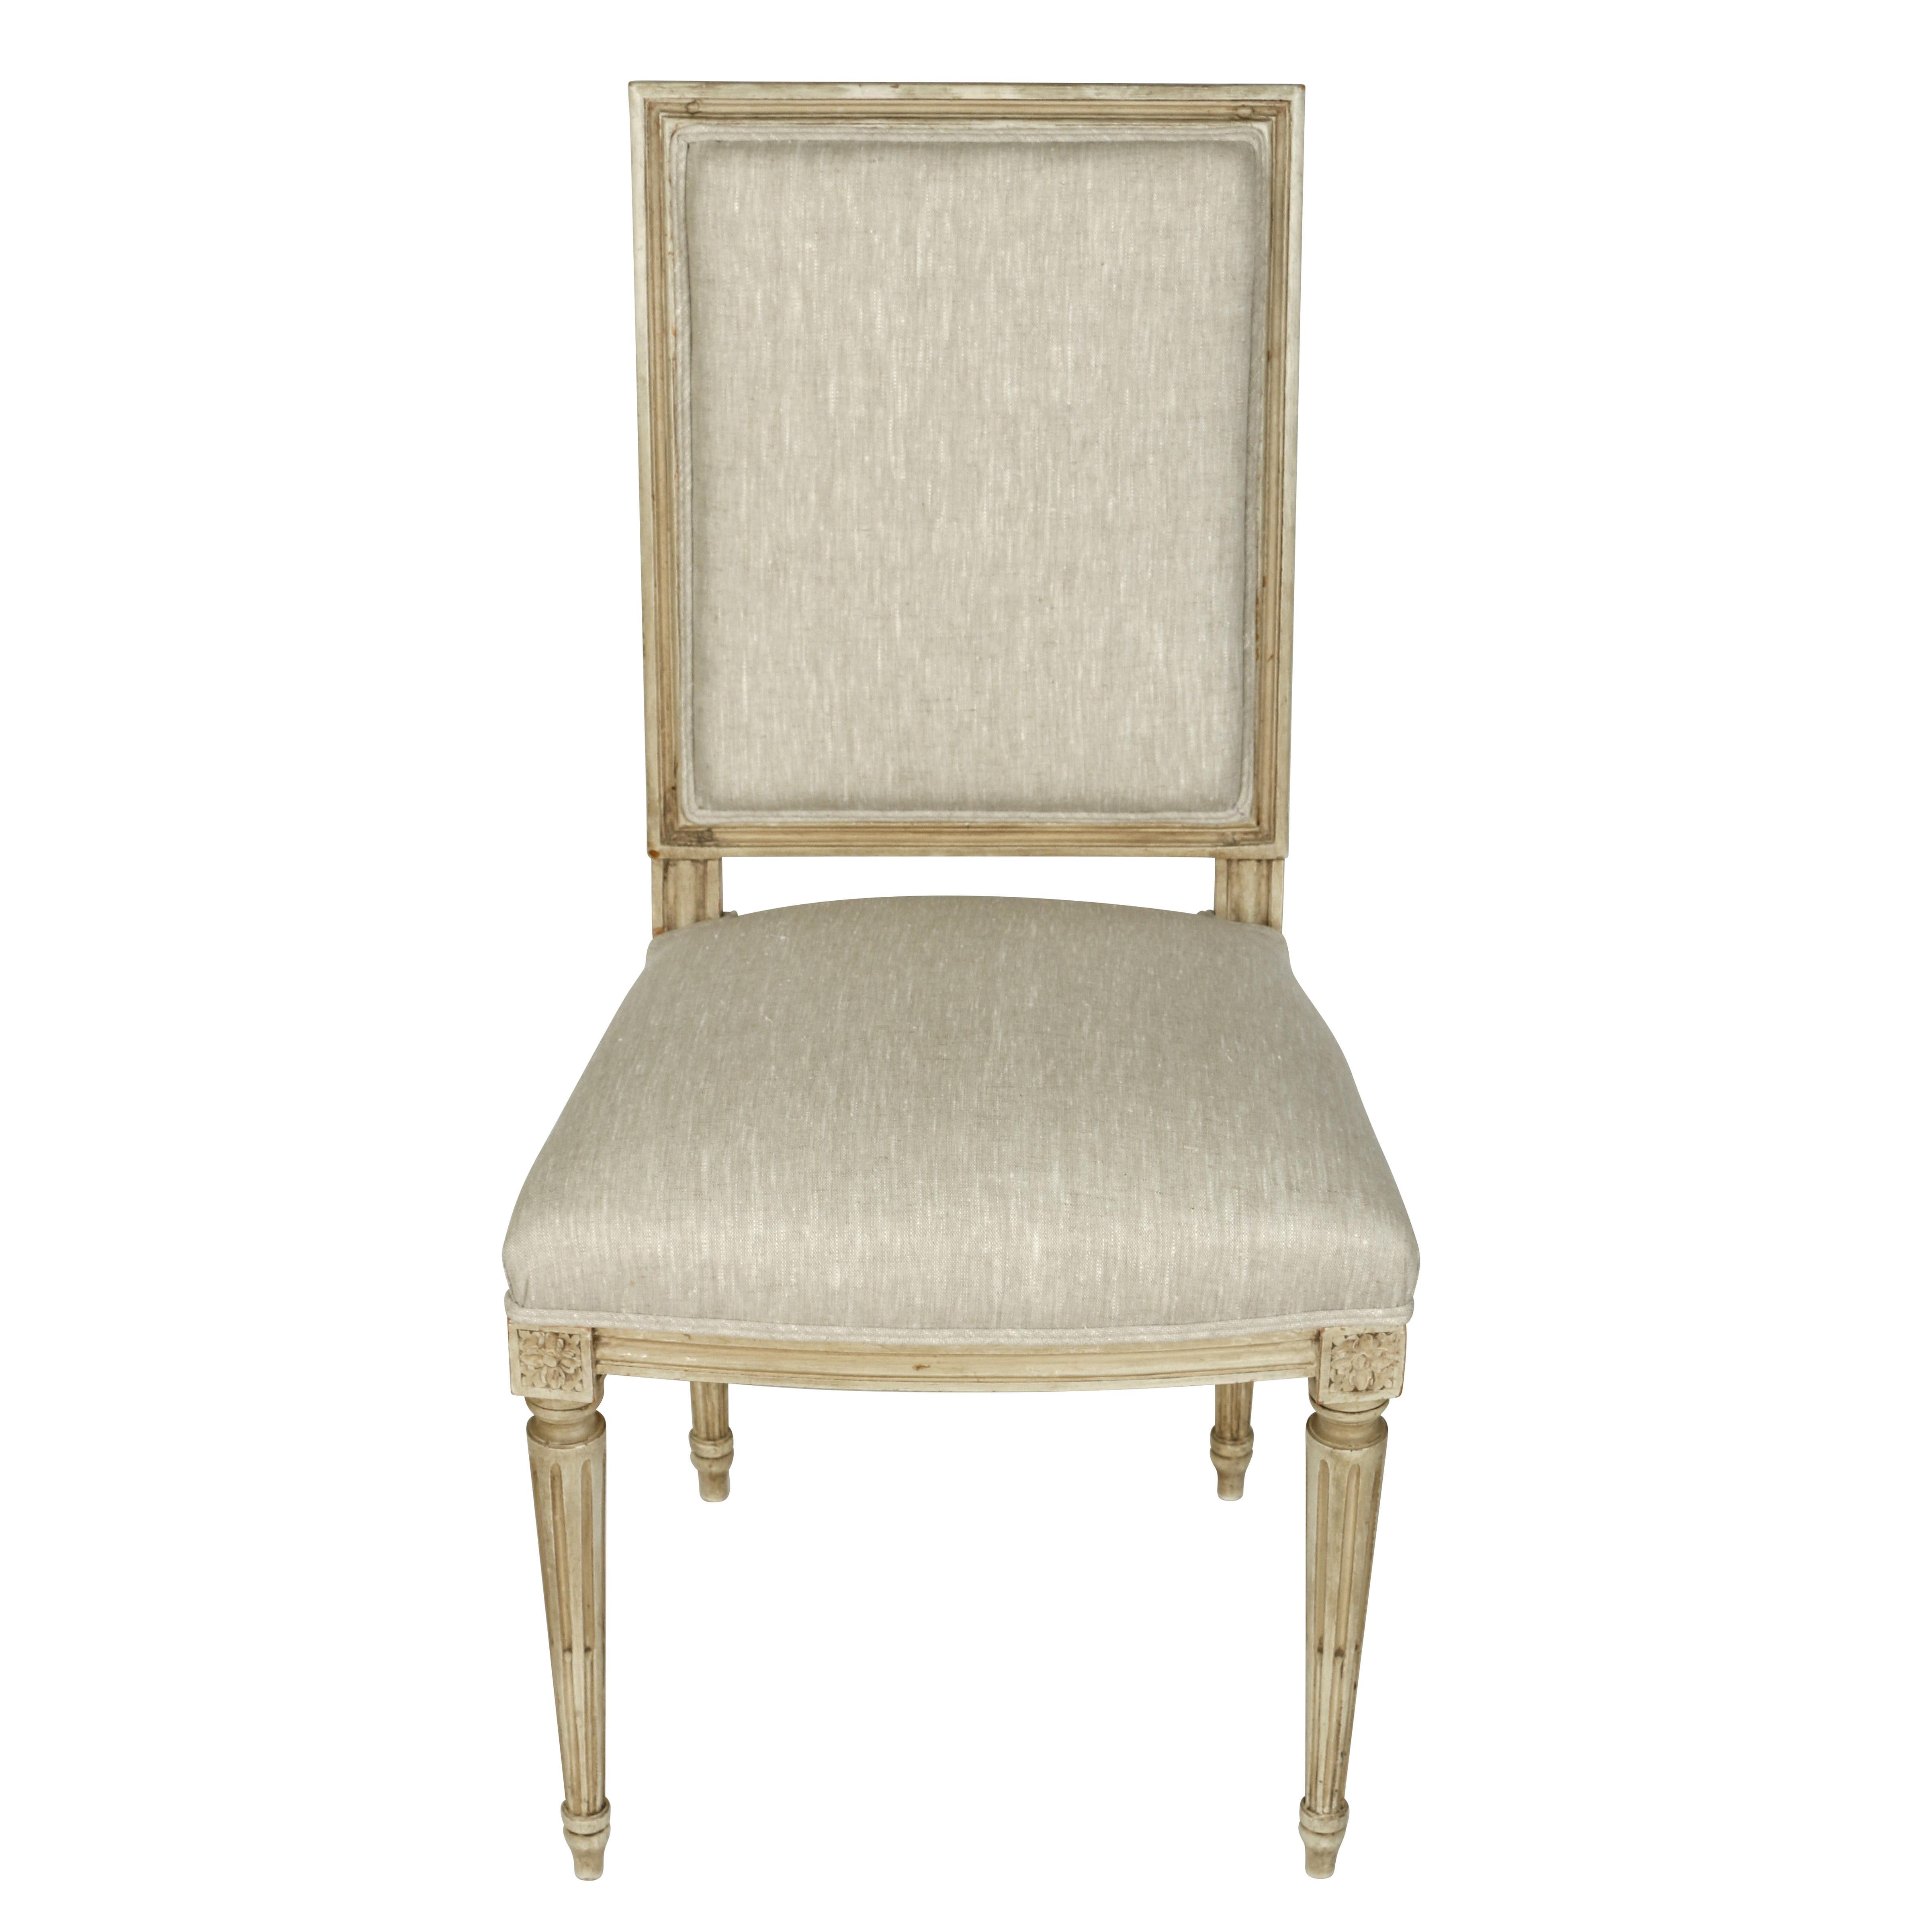 A set of dining chairs painted in a grayish white finish upholstered in a natural linen. These graceful chairs feature many of lovely details characteristic of the Louis XVI style including a square, molded back, fluted, tapered legs, and beautiful